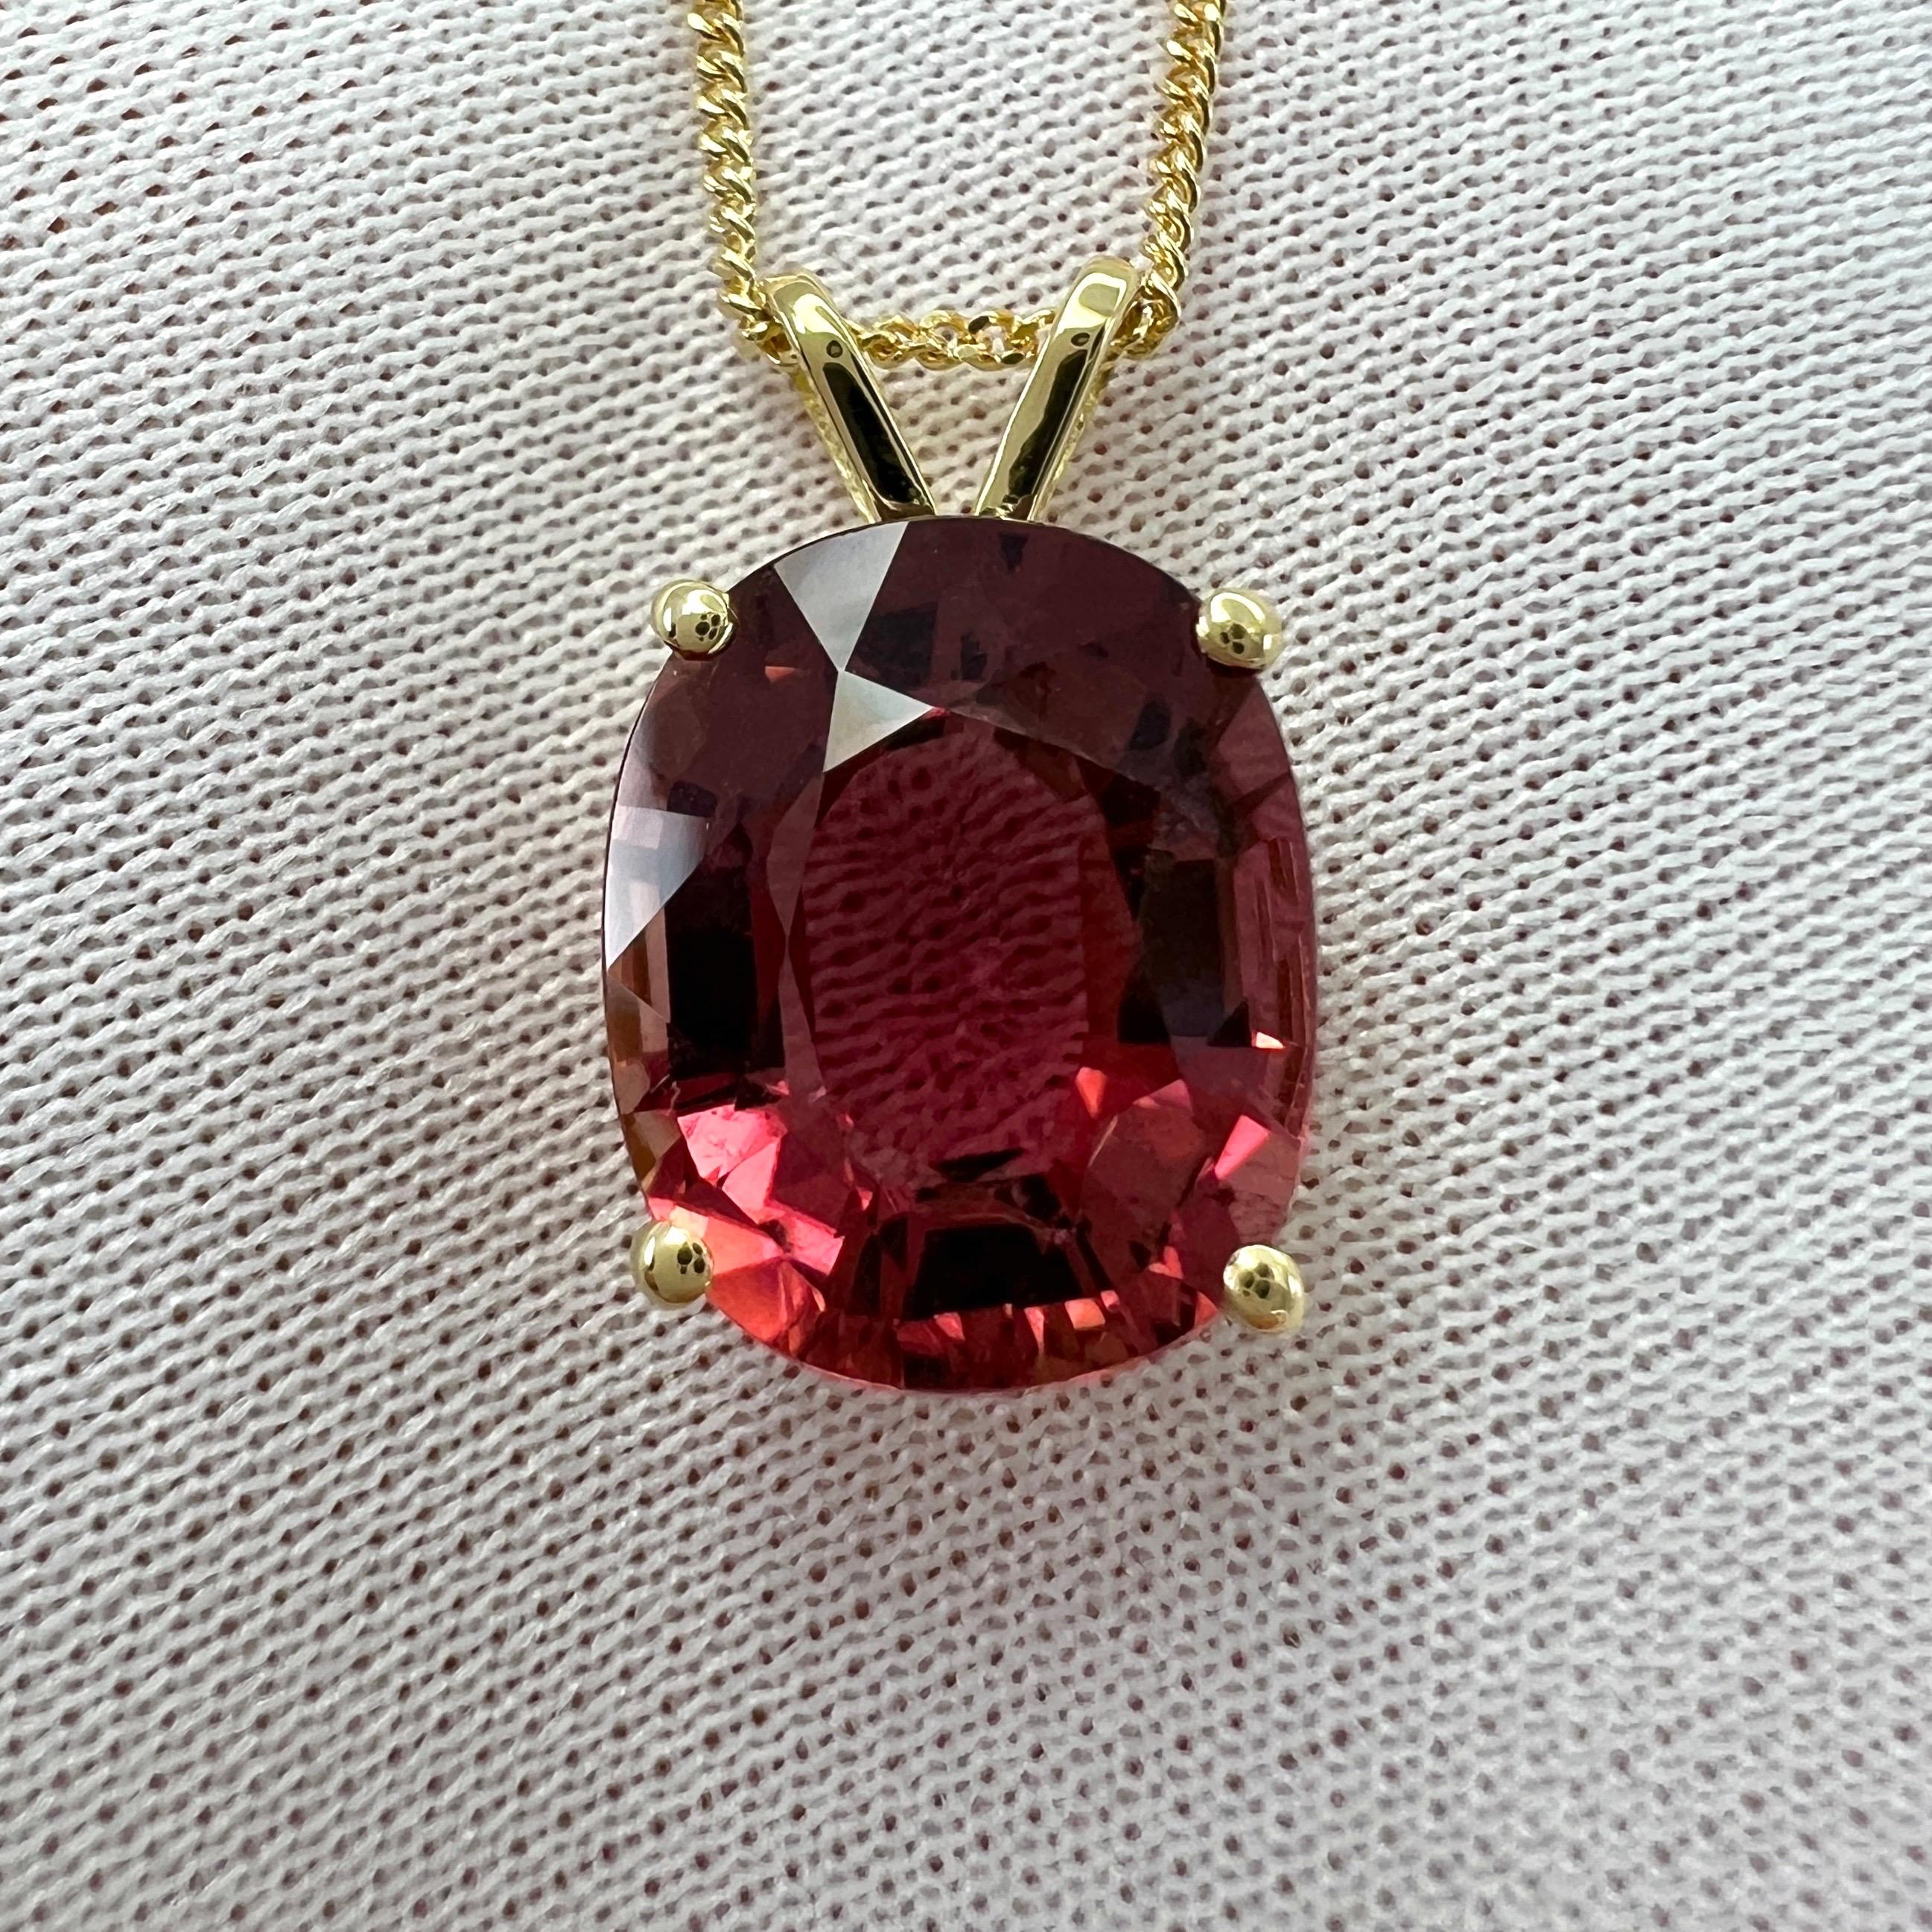 5.35ct Pink Orange Rubellite Tourmaline Oval 18k Yellow Gold Pendant Necklace For Sale 1